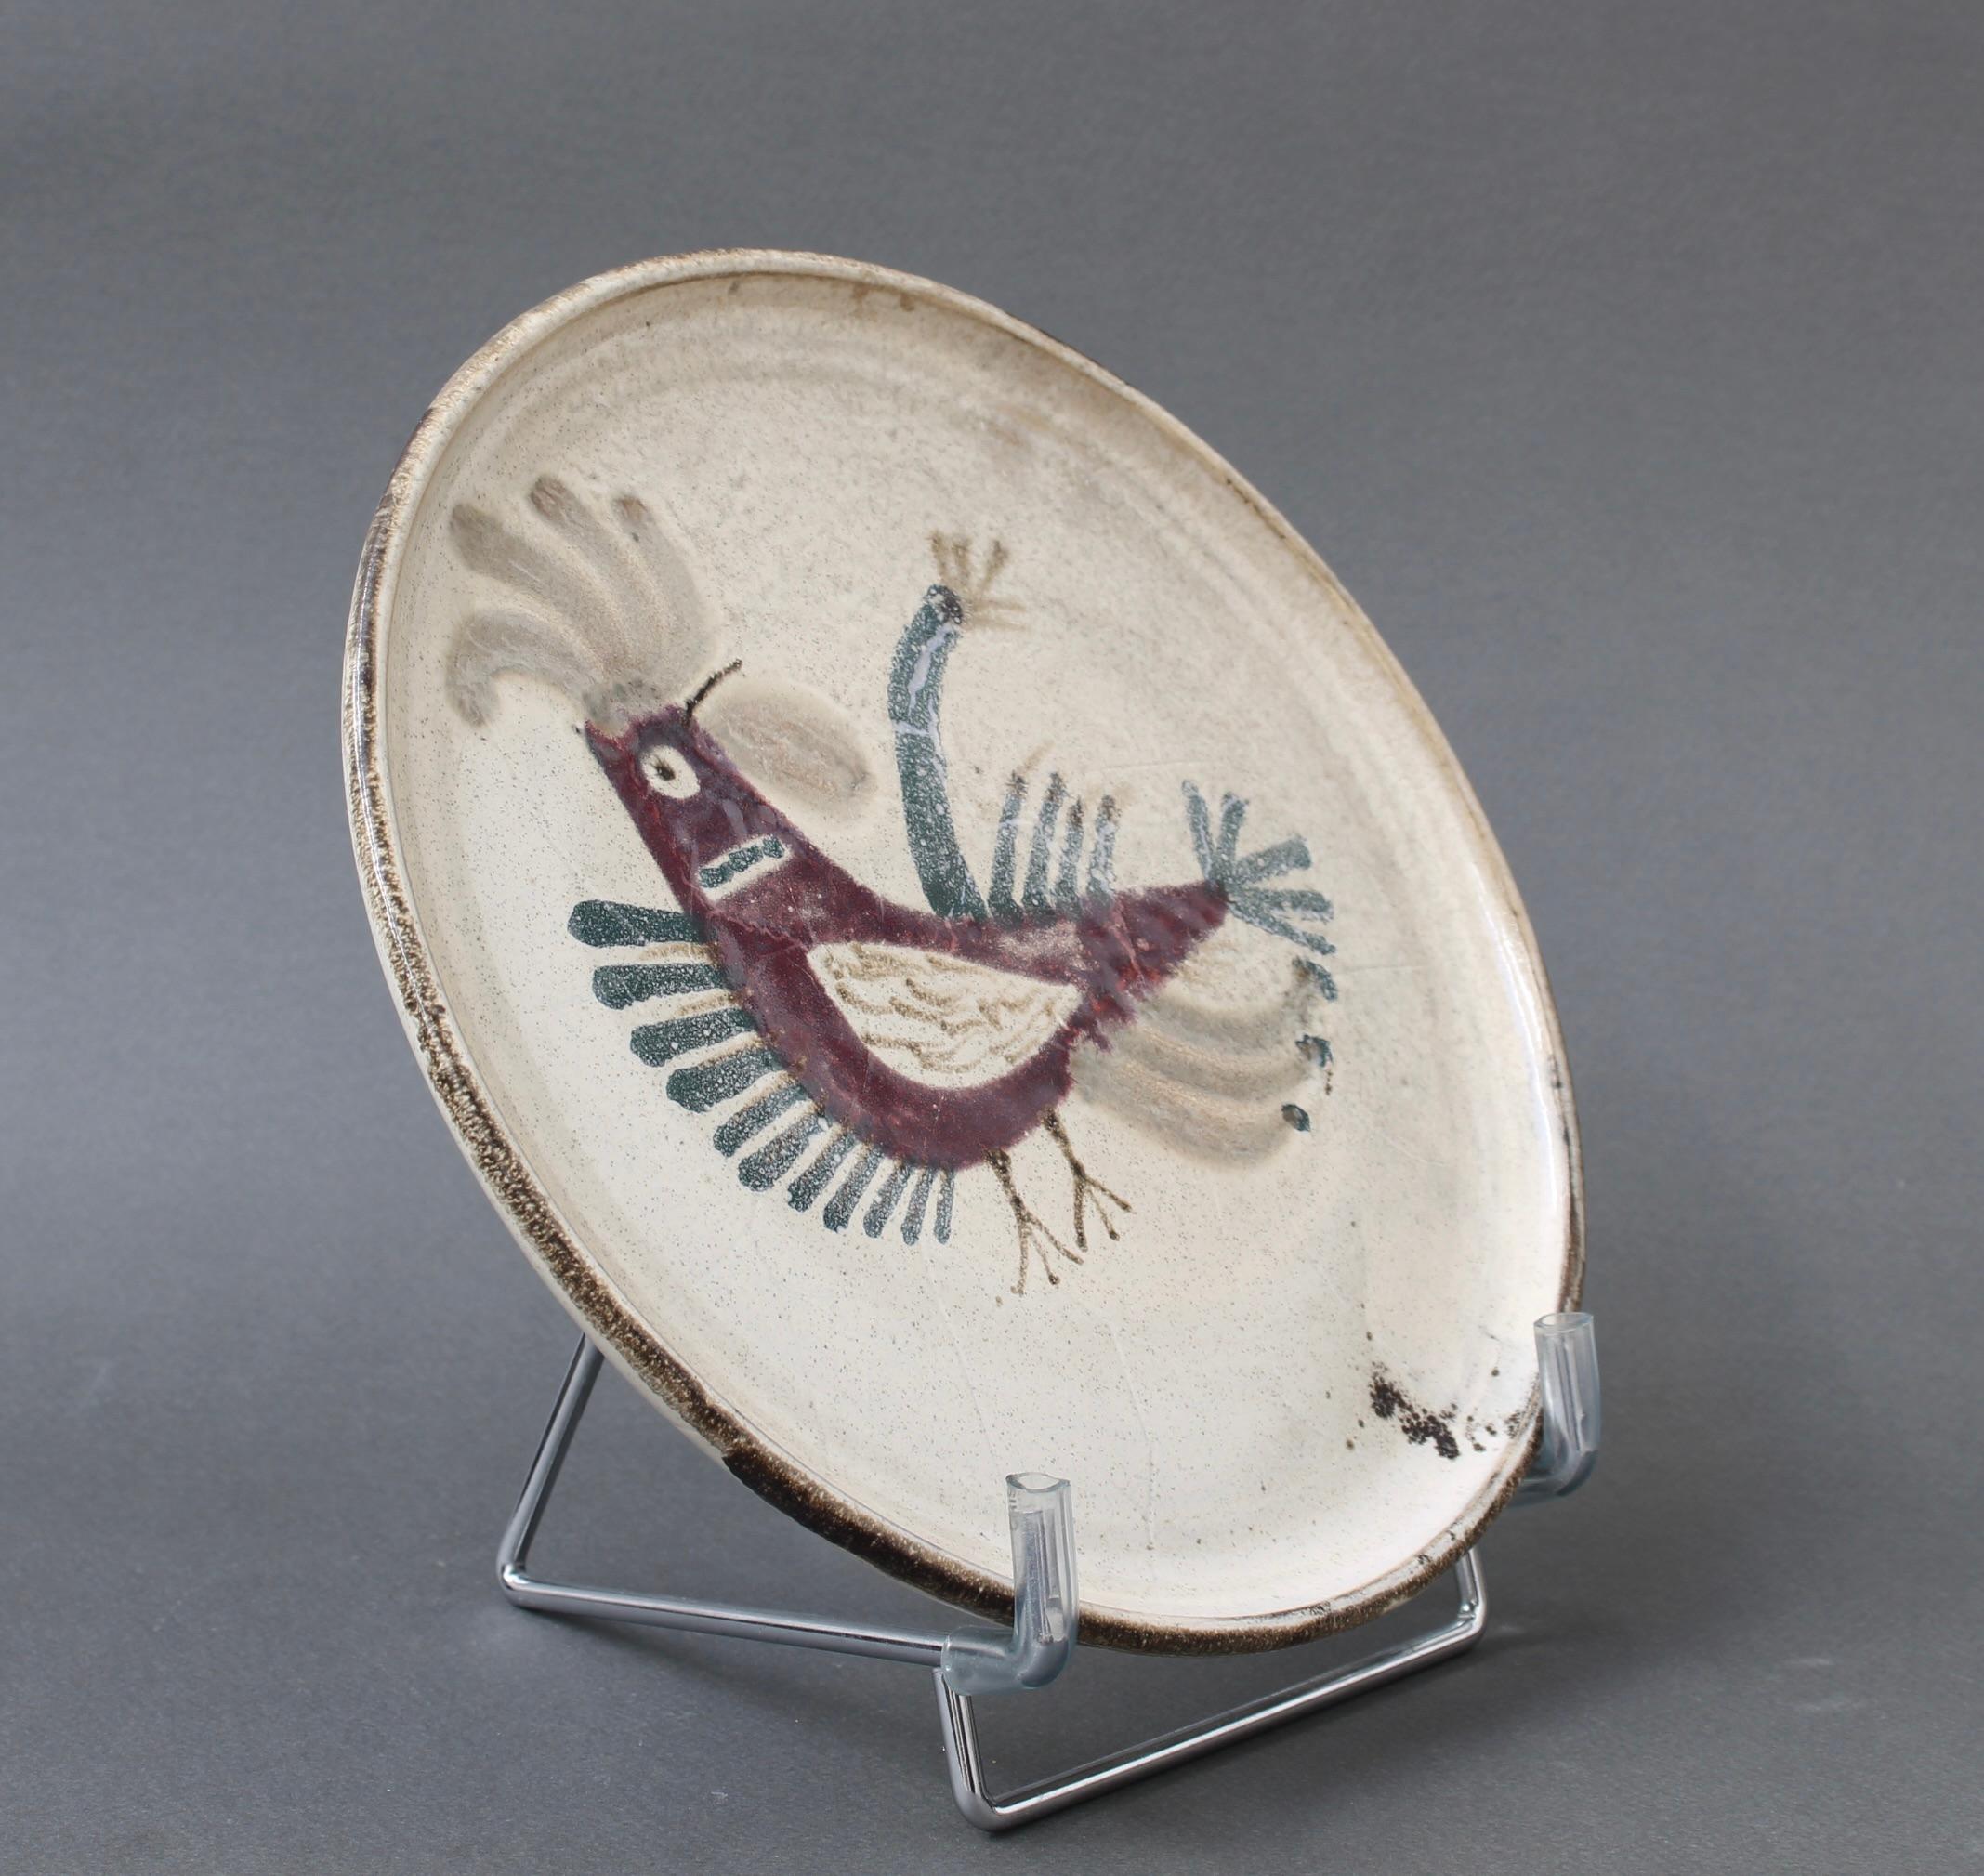 Hand-Painted Mid-Century French Ceramic Decorative Plate by Le Mûrier (circa 1960s) For Sale